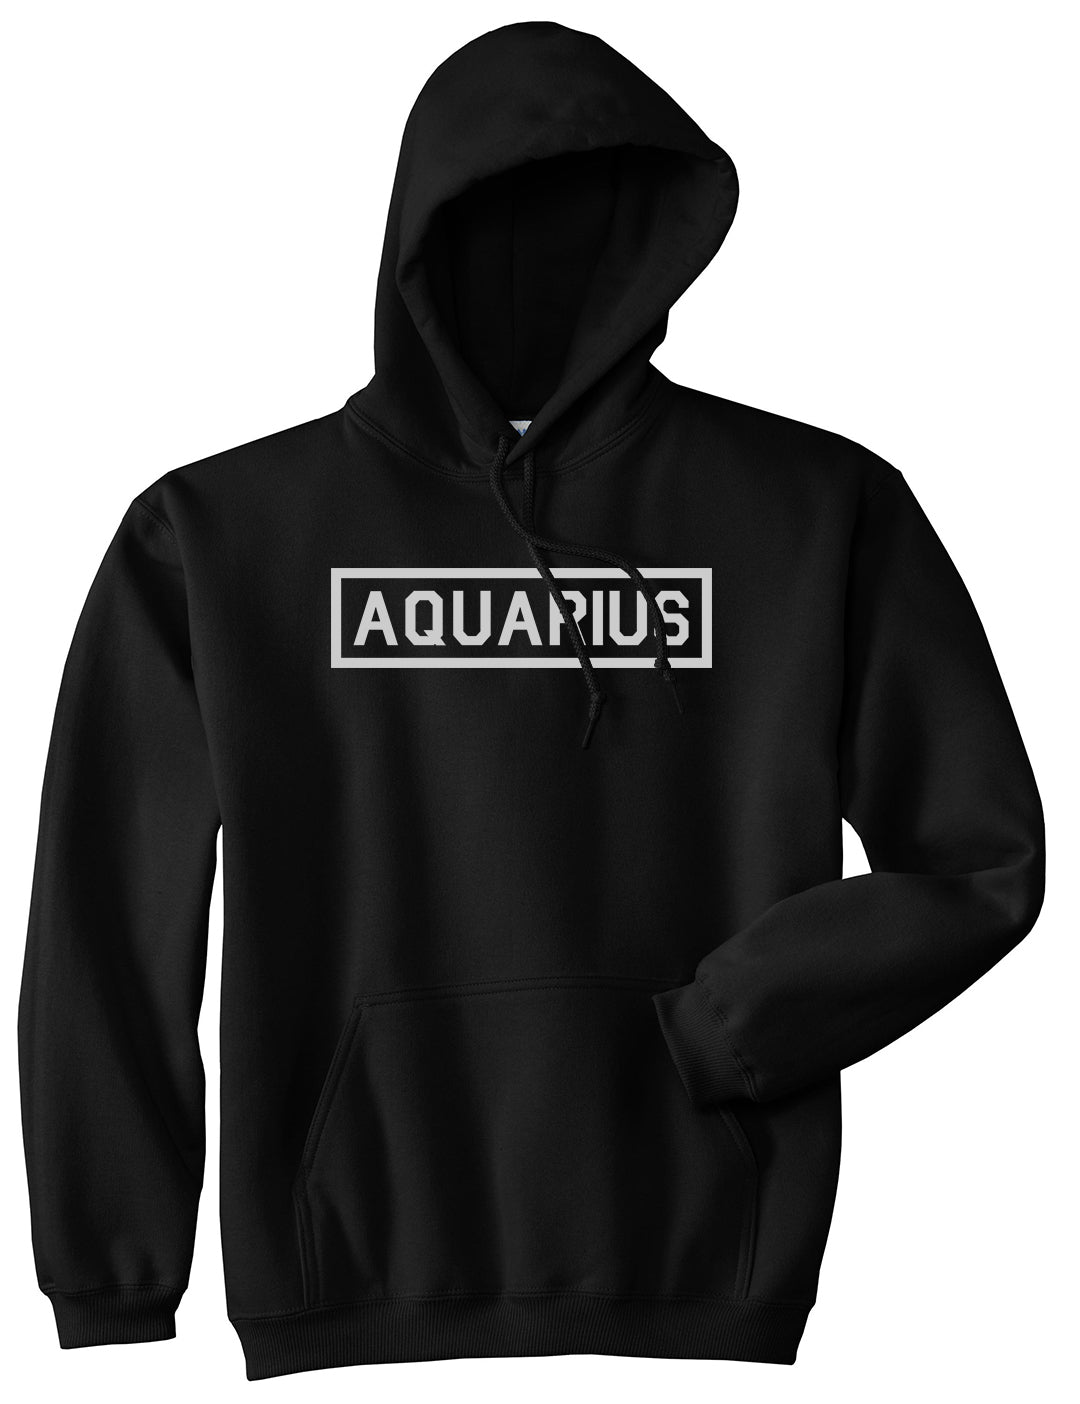 Aquarius Horoscope Sign Mens Black Pullover Hoodie by KINGS OF NY